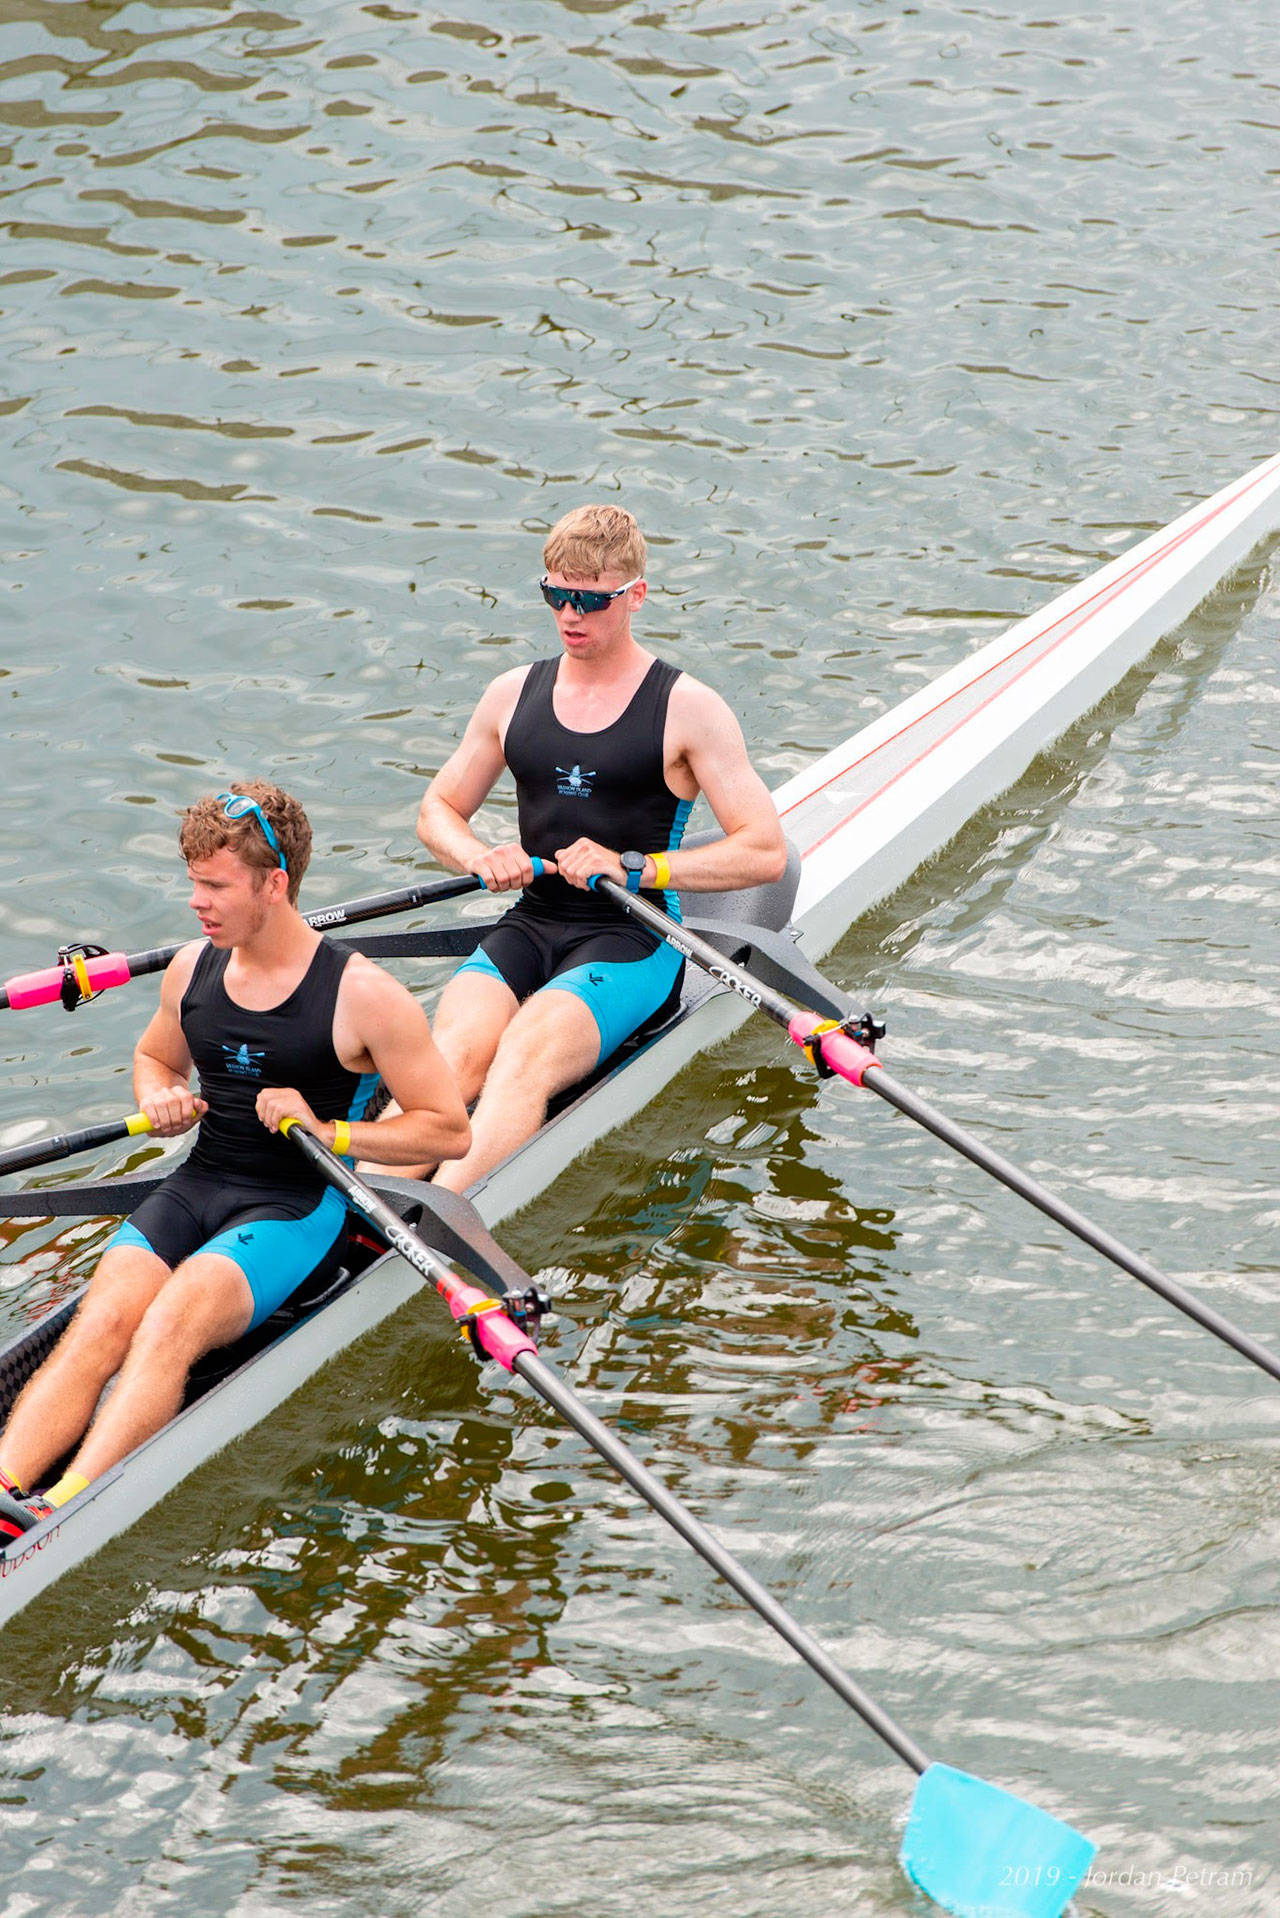 Tor Ormseth and Rohin Petram sit in their double before racing to a personal best time of 6:55 in the repechage at the Youth National Championships in Sarasota, Florida. (Jordan Petram Photo)